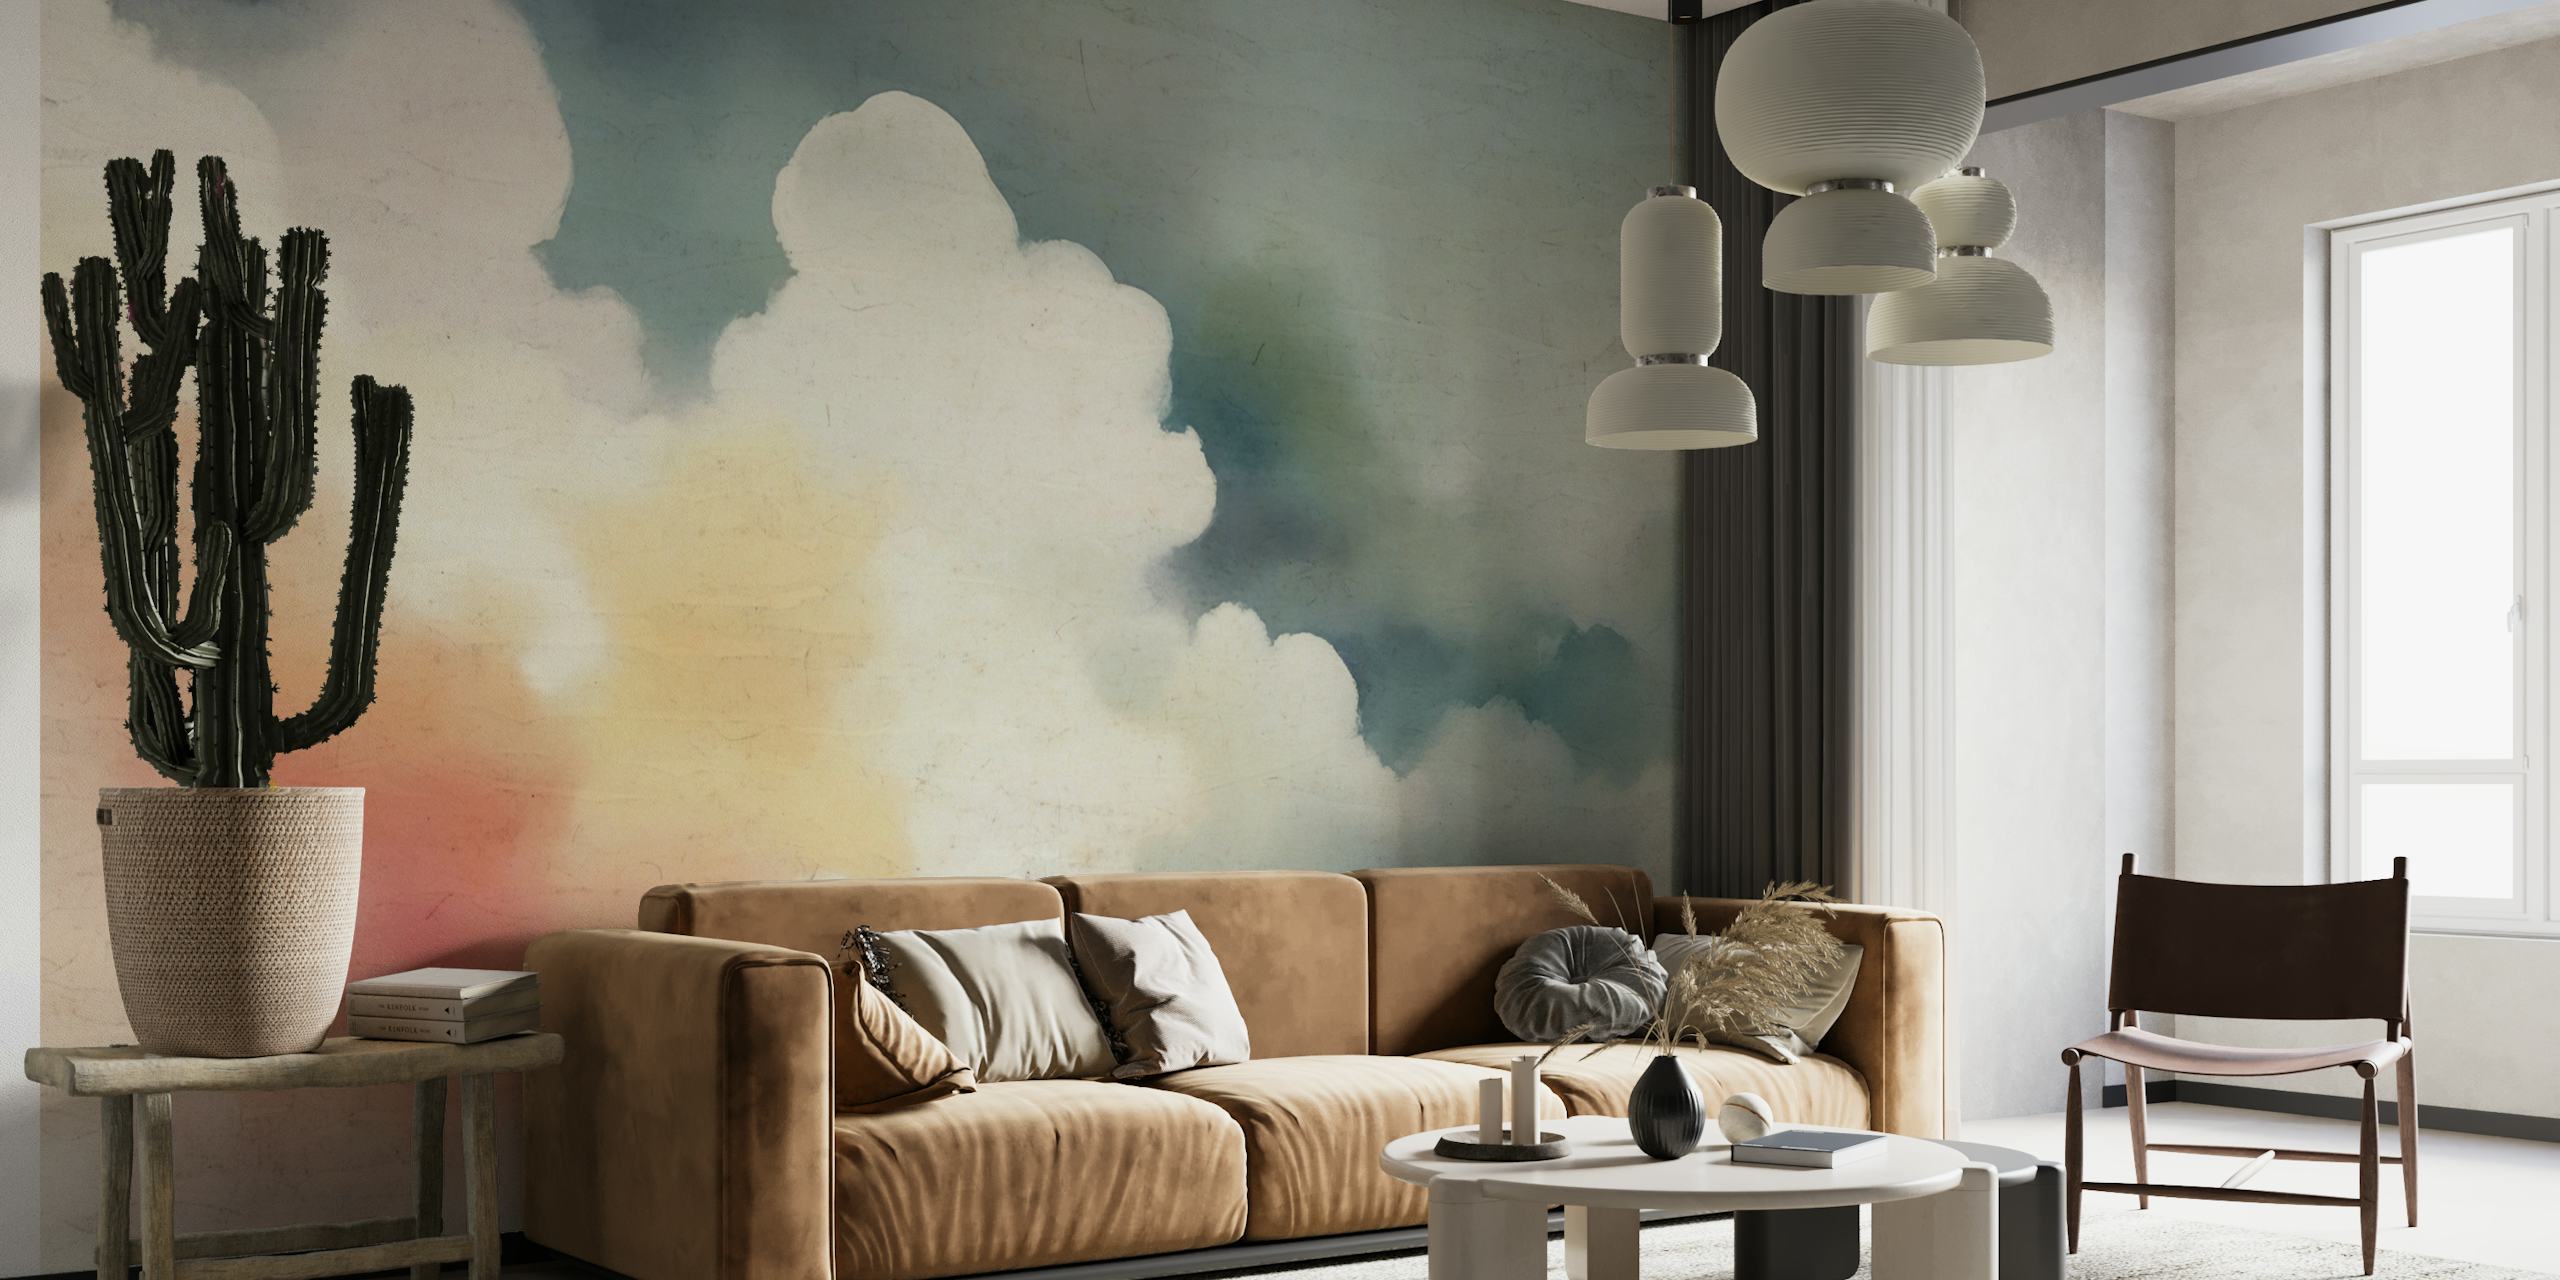 Pastel colored cloud mural evoking tranquility and serenity